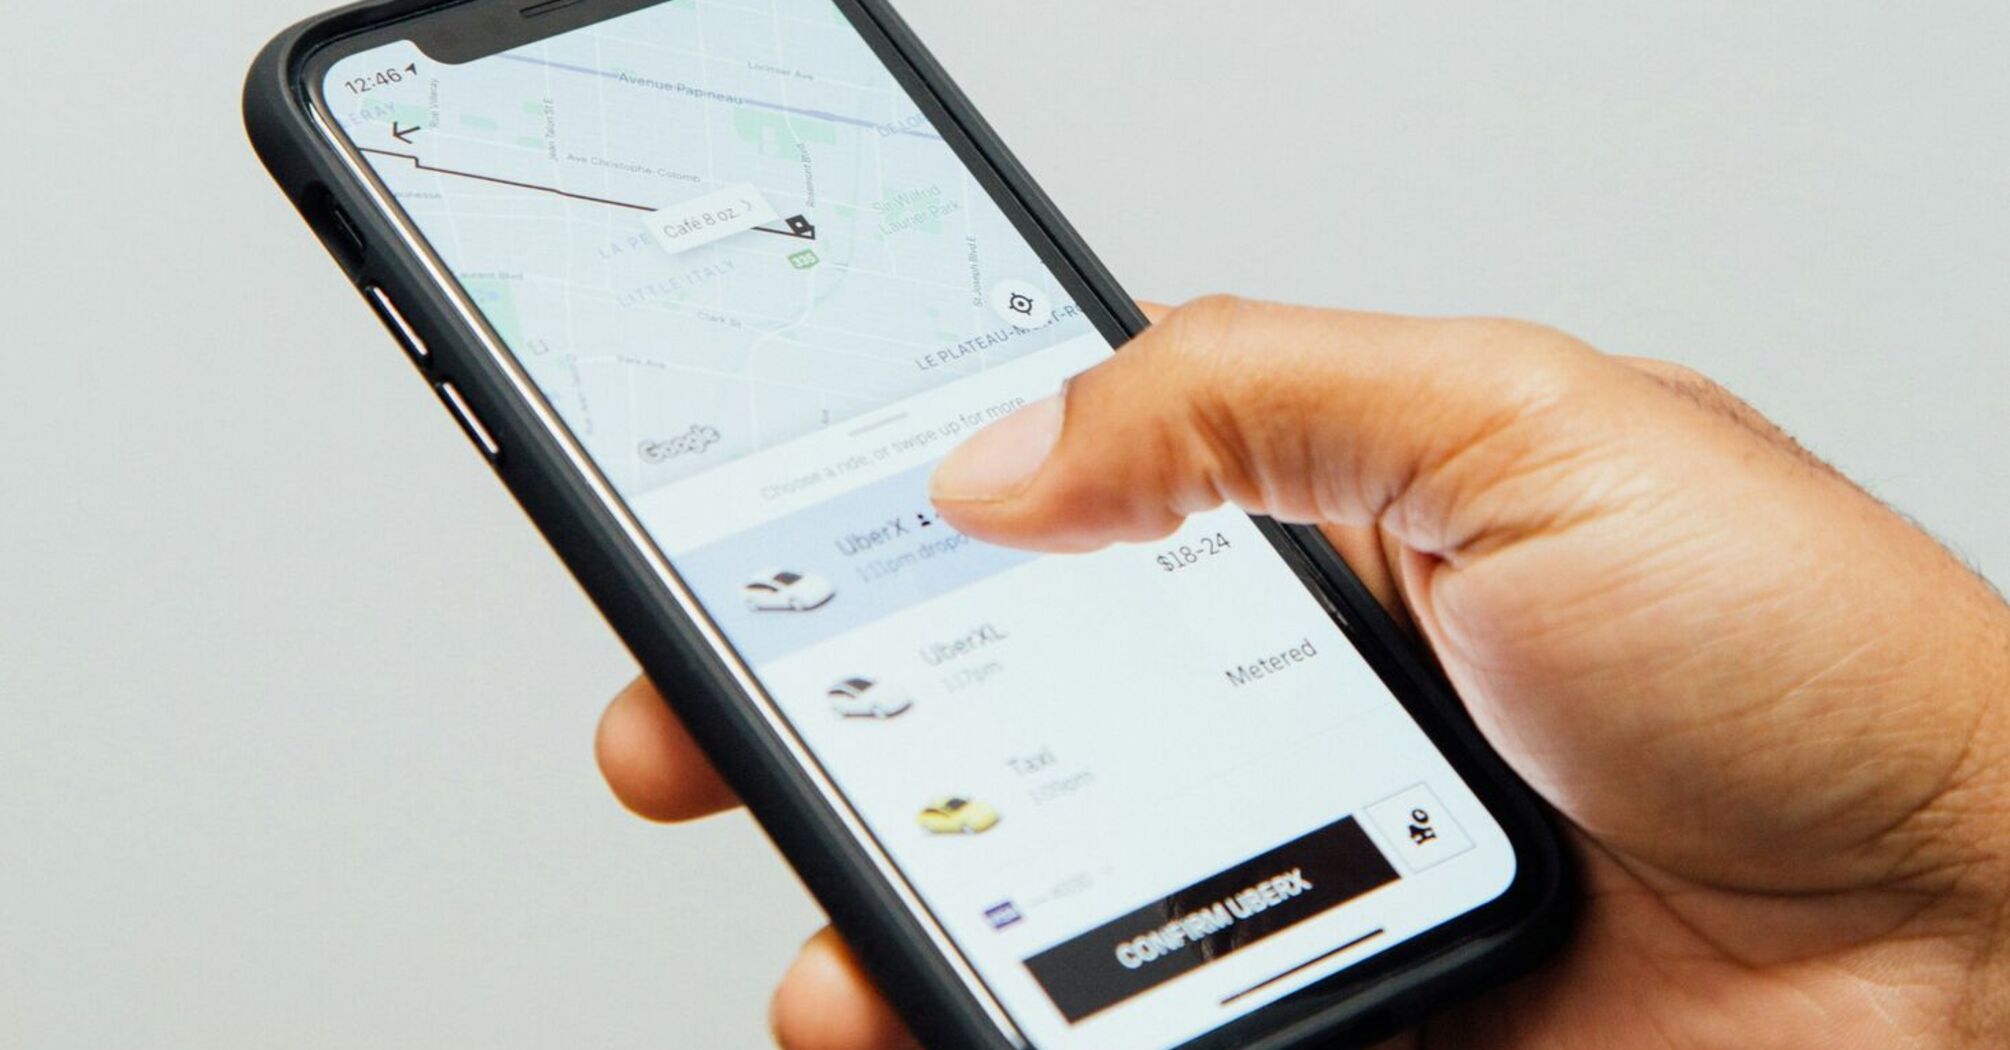 Hand holding smartphone with Uber app open